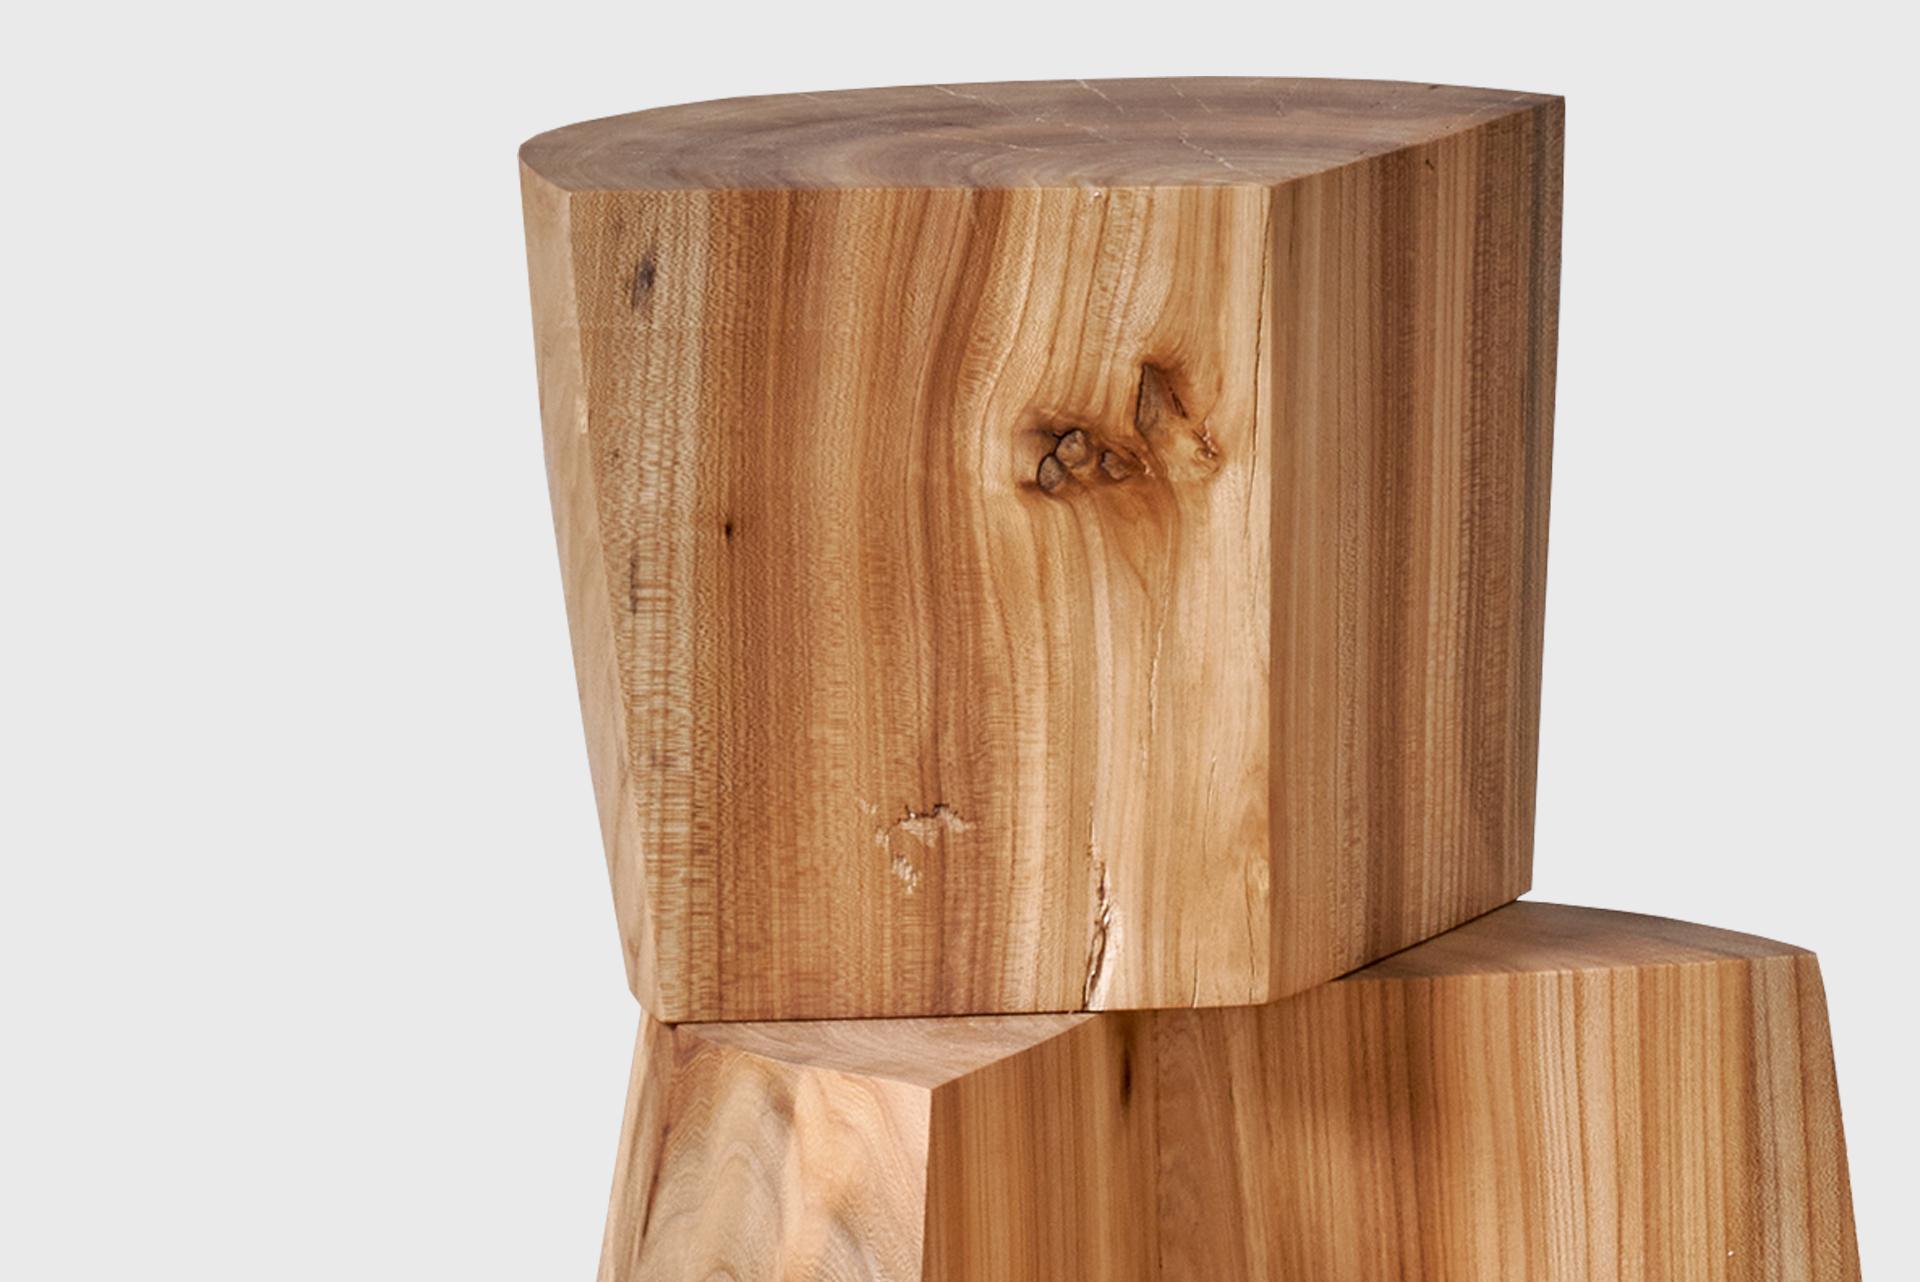 Table / Stool #2.
Manufactured by Jonas Lutz.
Exclusively for SIDE.
Netherlands, 2023.
Natural Elm wood.

Measurements
34 x 27 x 46h cm
13,4 x 10,6 x 18,1h in

Provenance
Rotterdam, Netherlands.

Exhibitions
Casavells